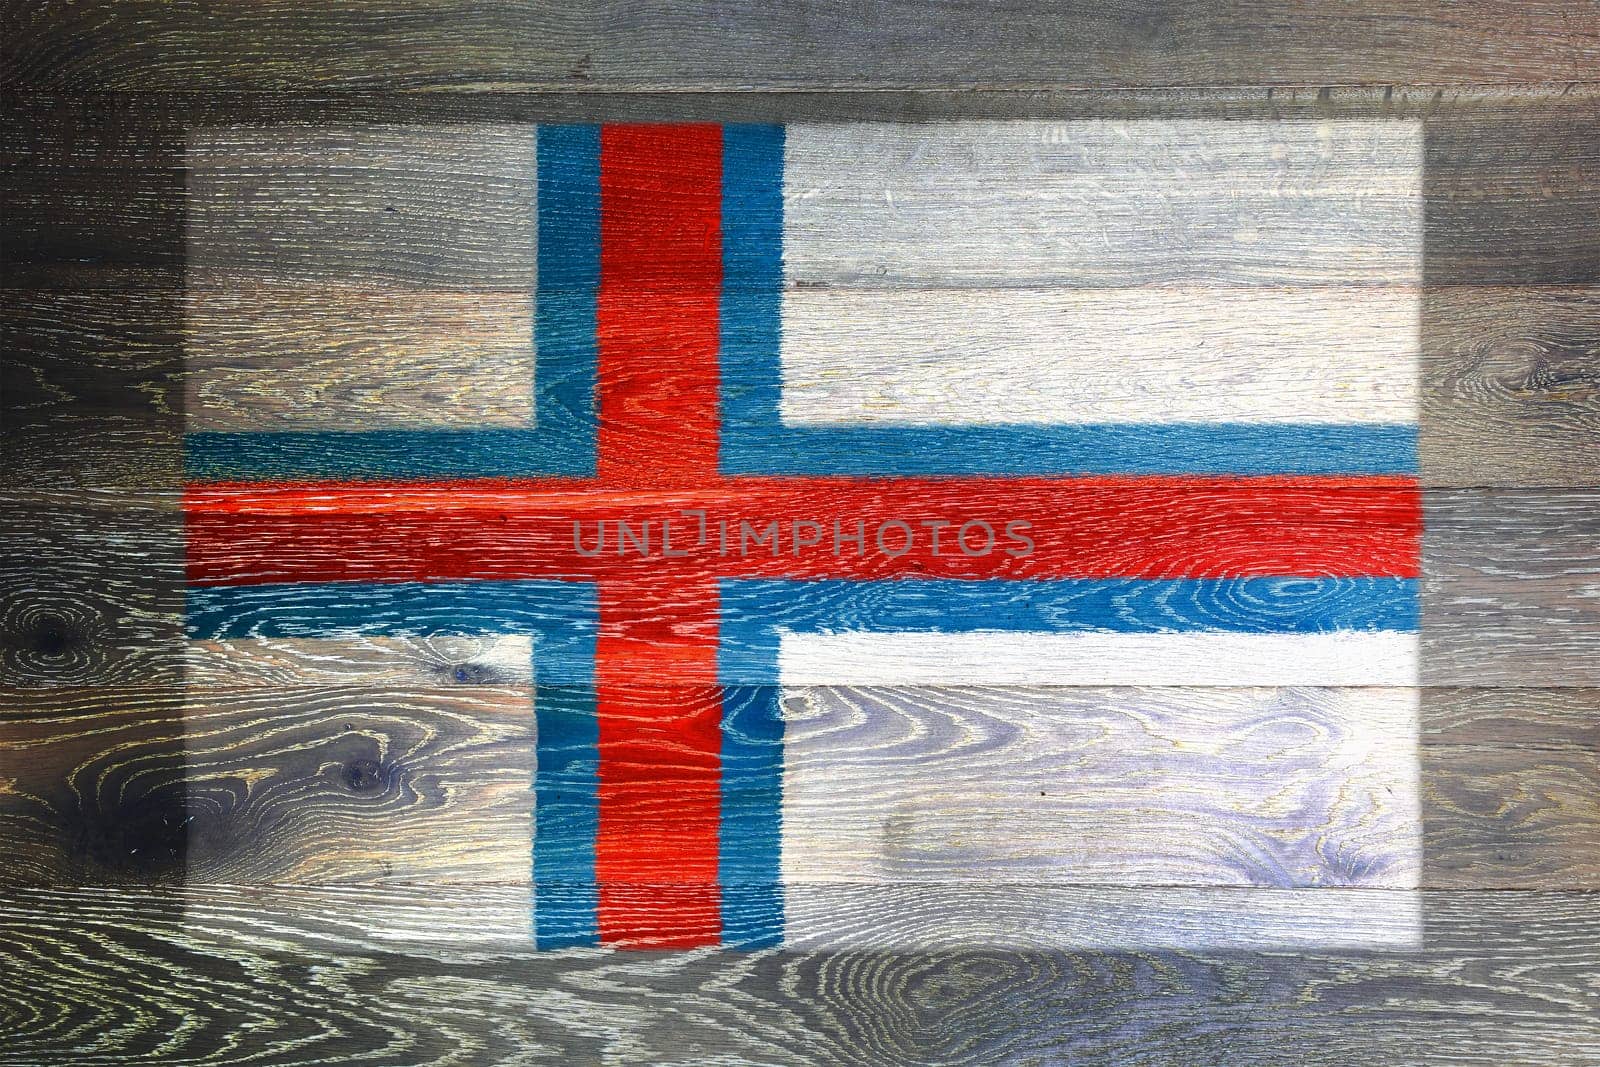 A Faroe islands flag on rustic old wood surface background